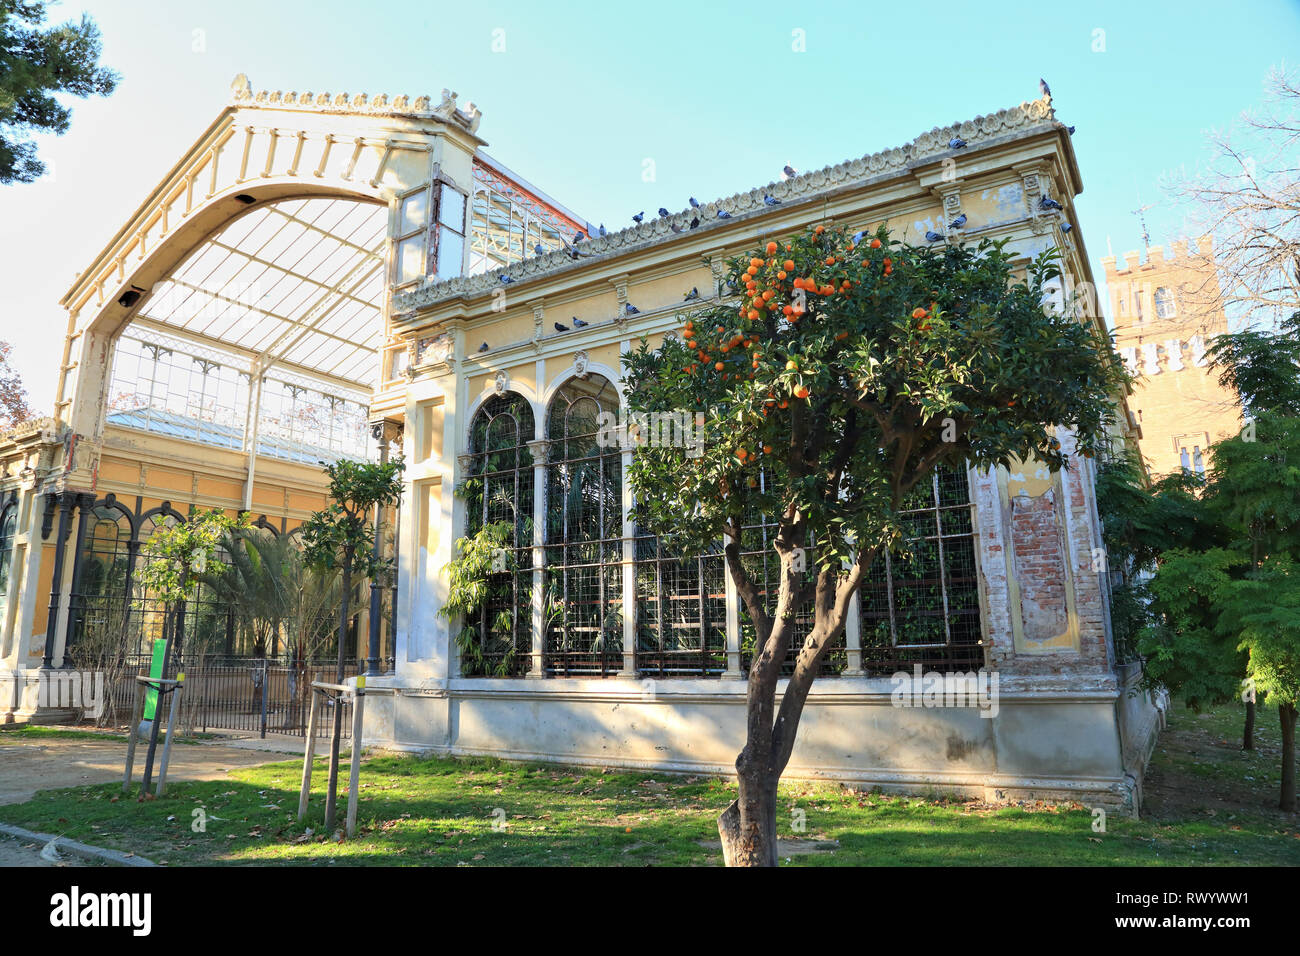 The Hivernacle (greenhouse) in the Ciudadella Park Stock Photo